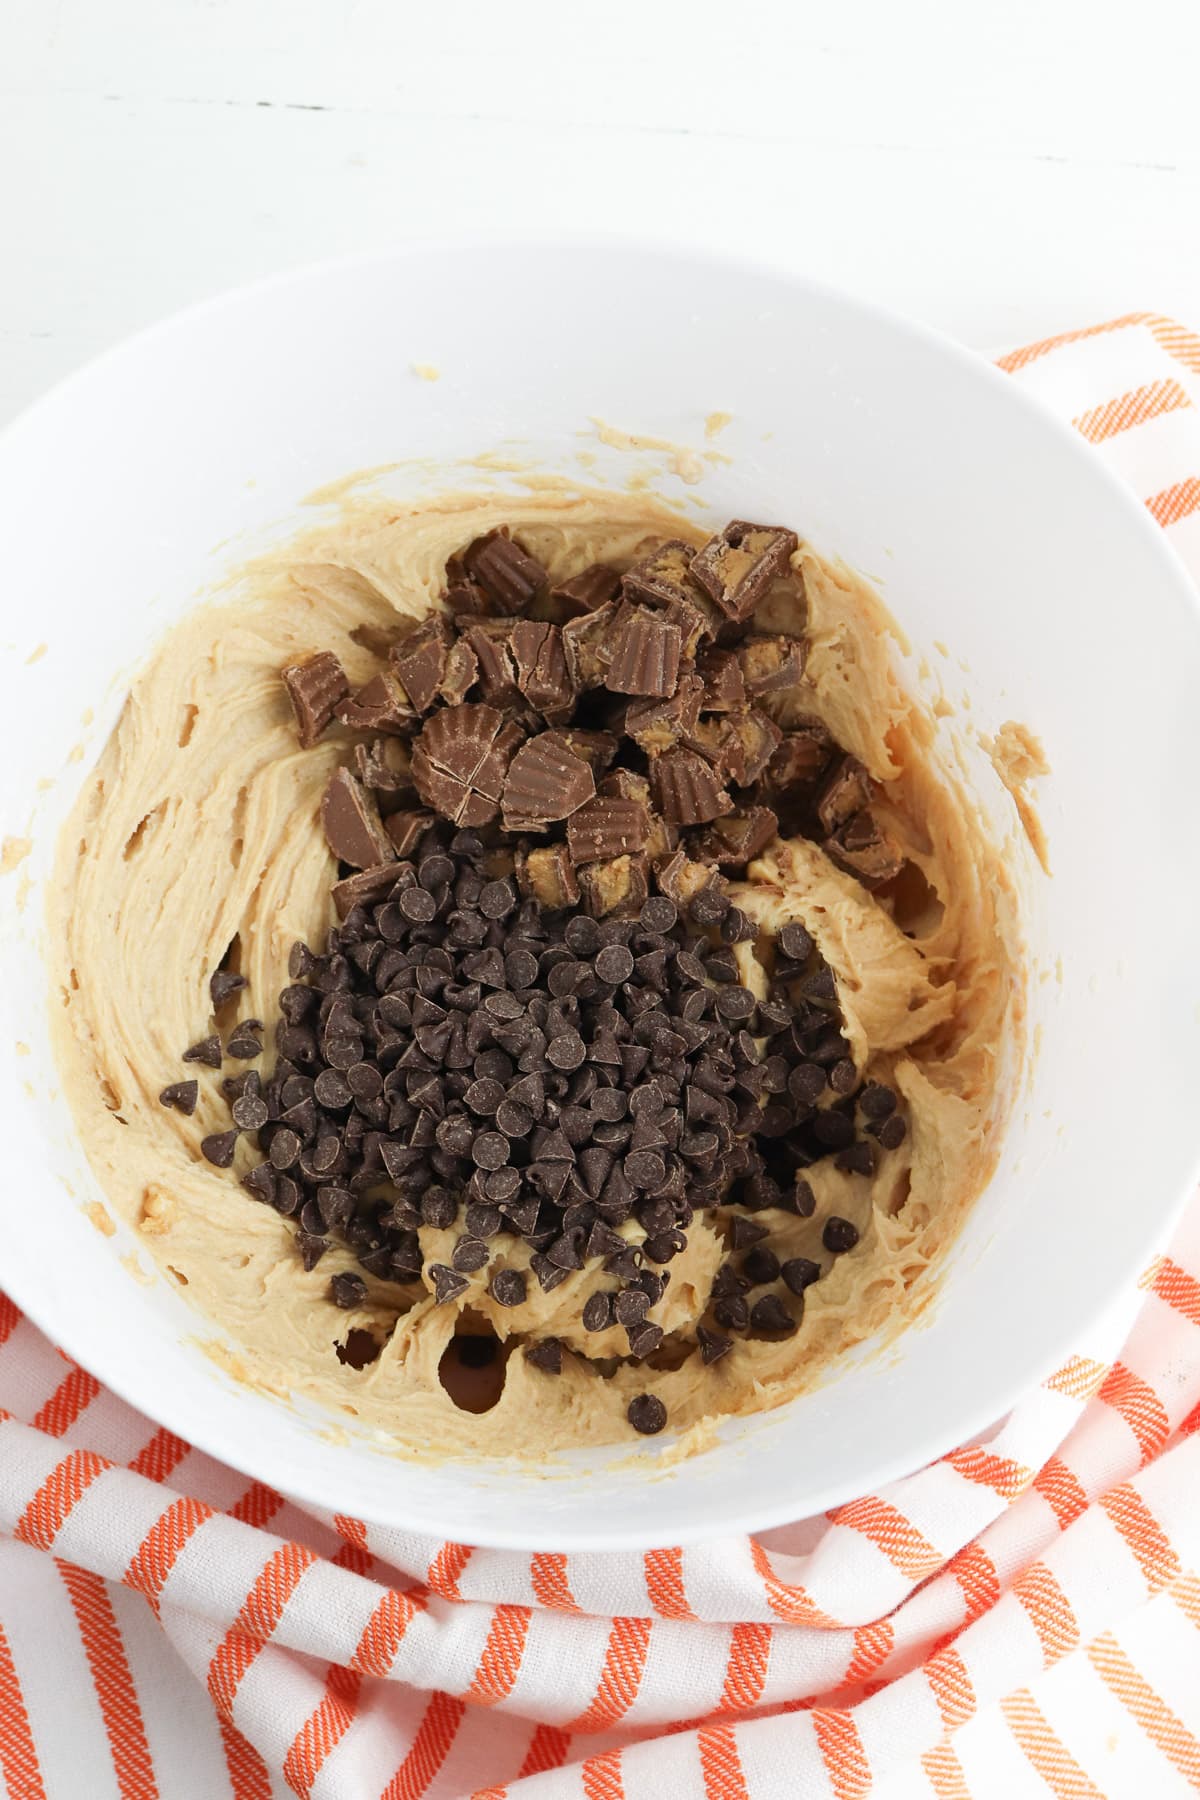 Peanut butter mixture combines with chocolate and Reese's in a bowl